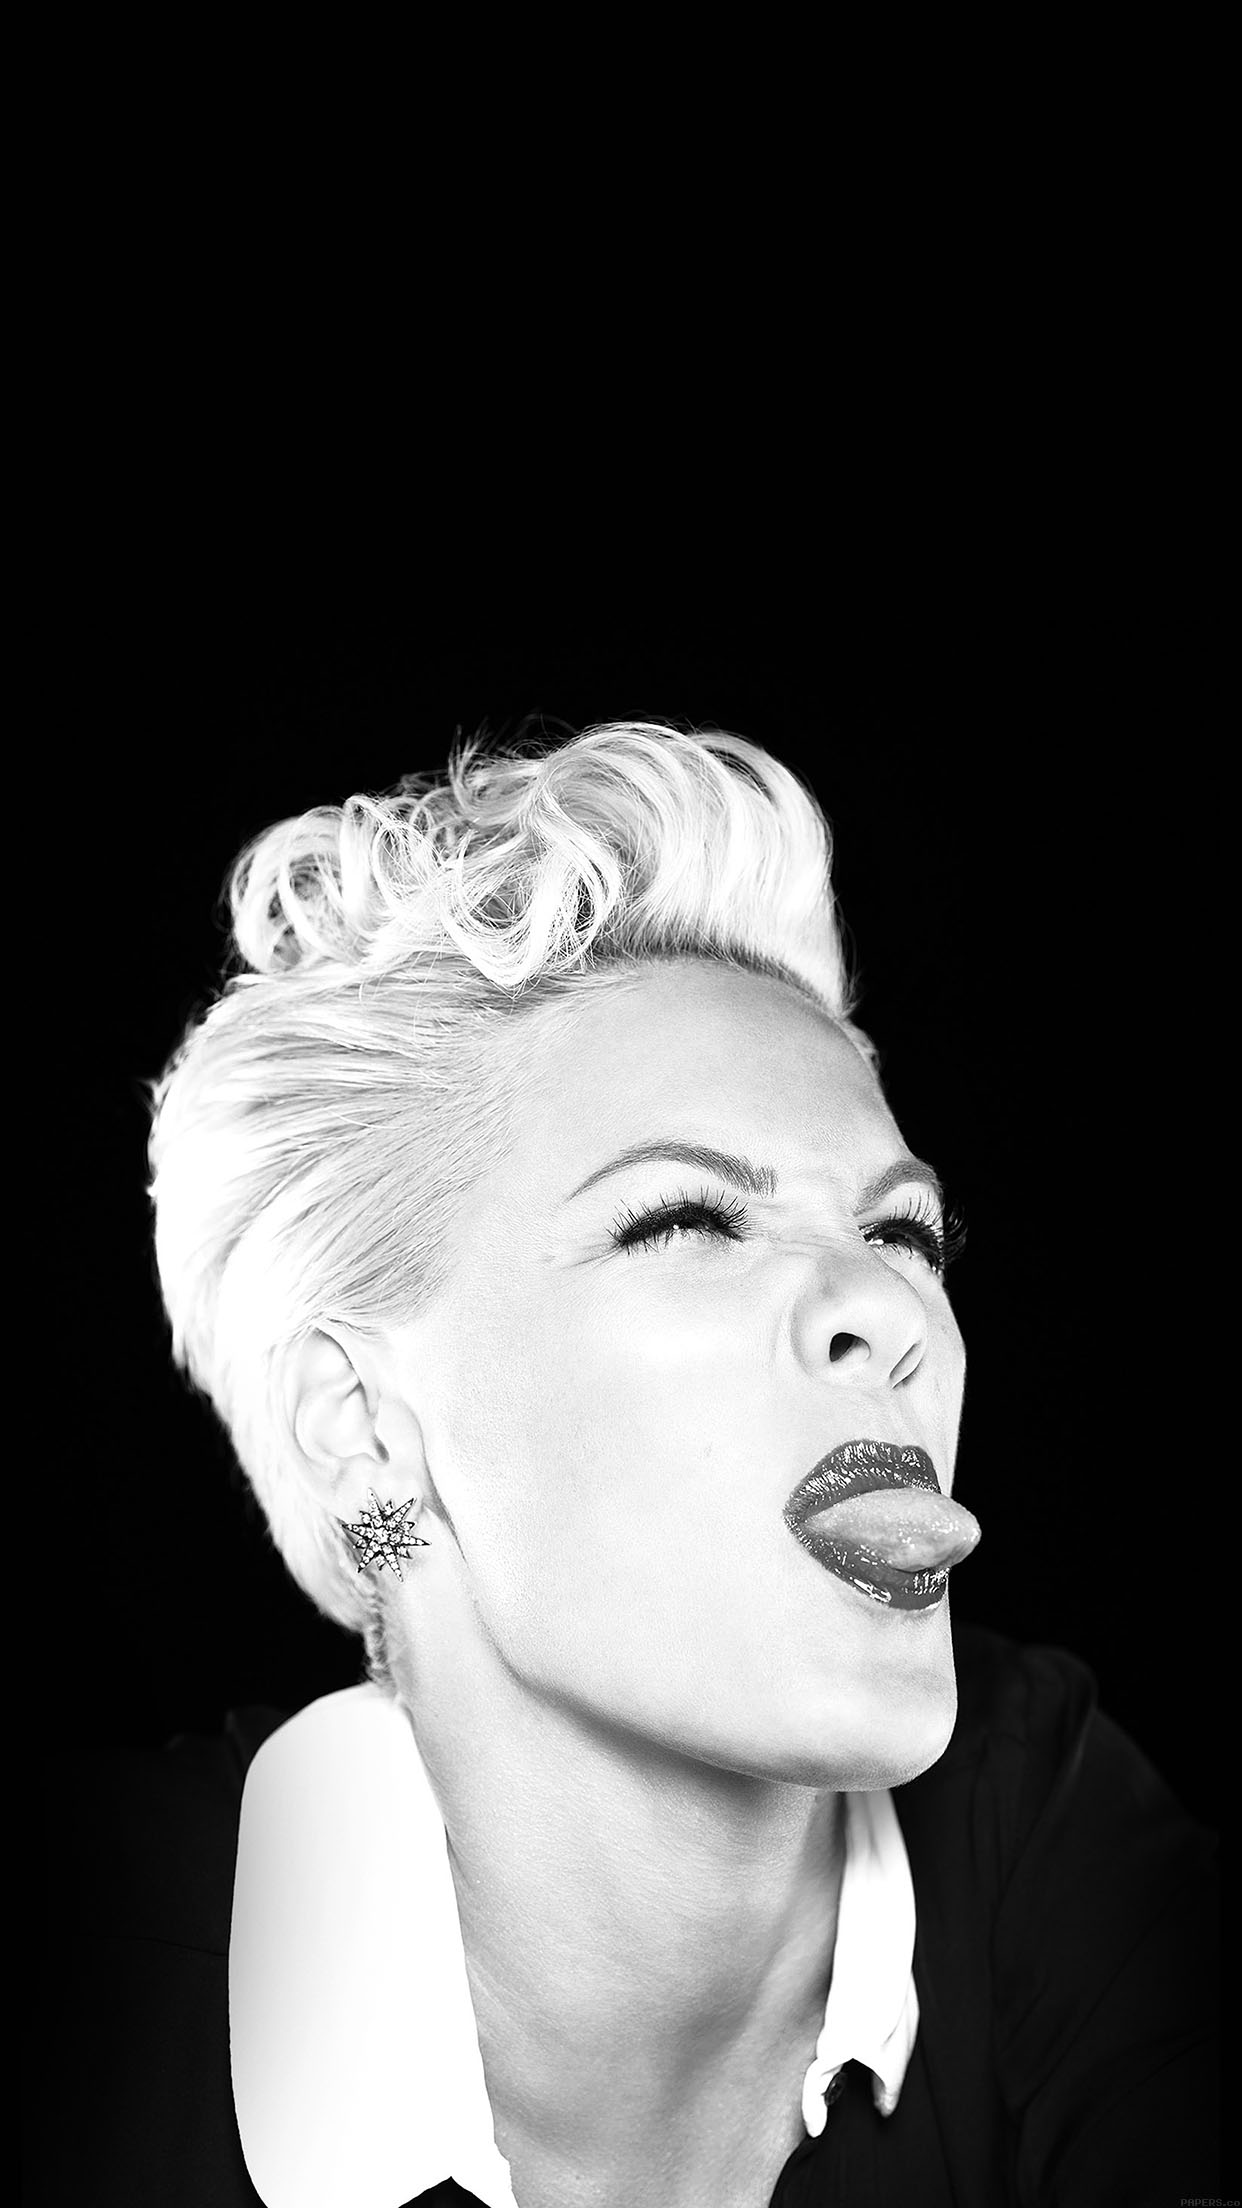 Pink Funny Music Girl Face Android wallpaper